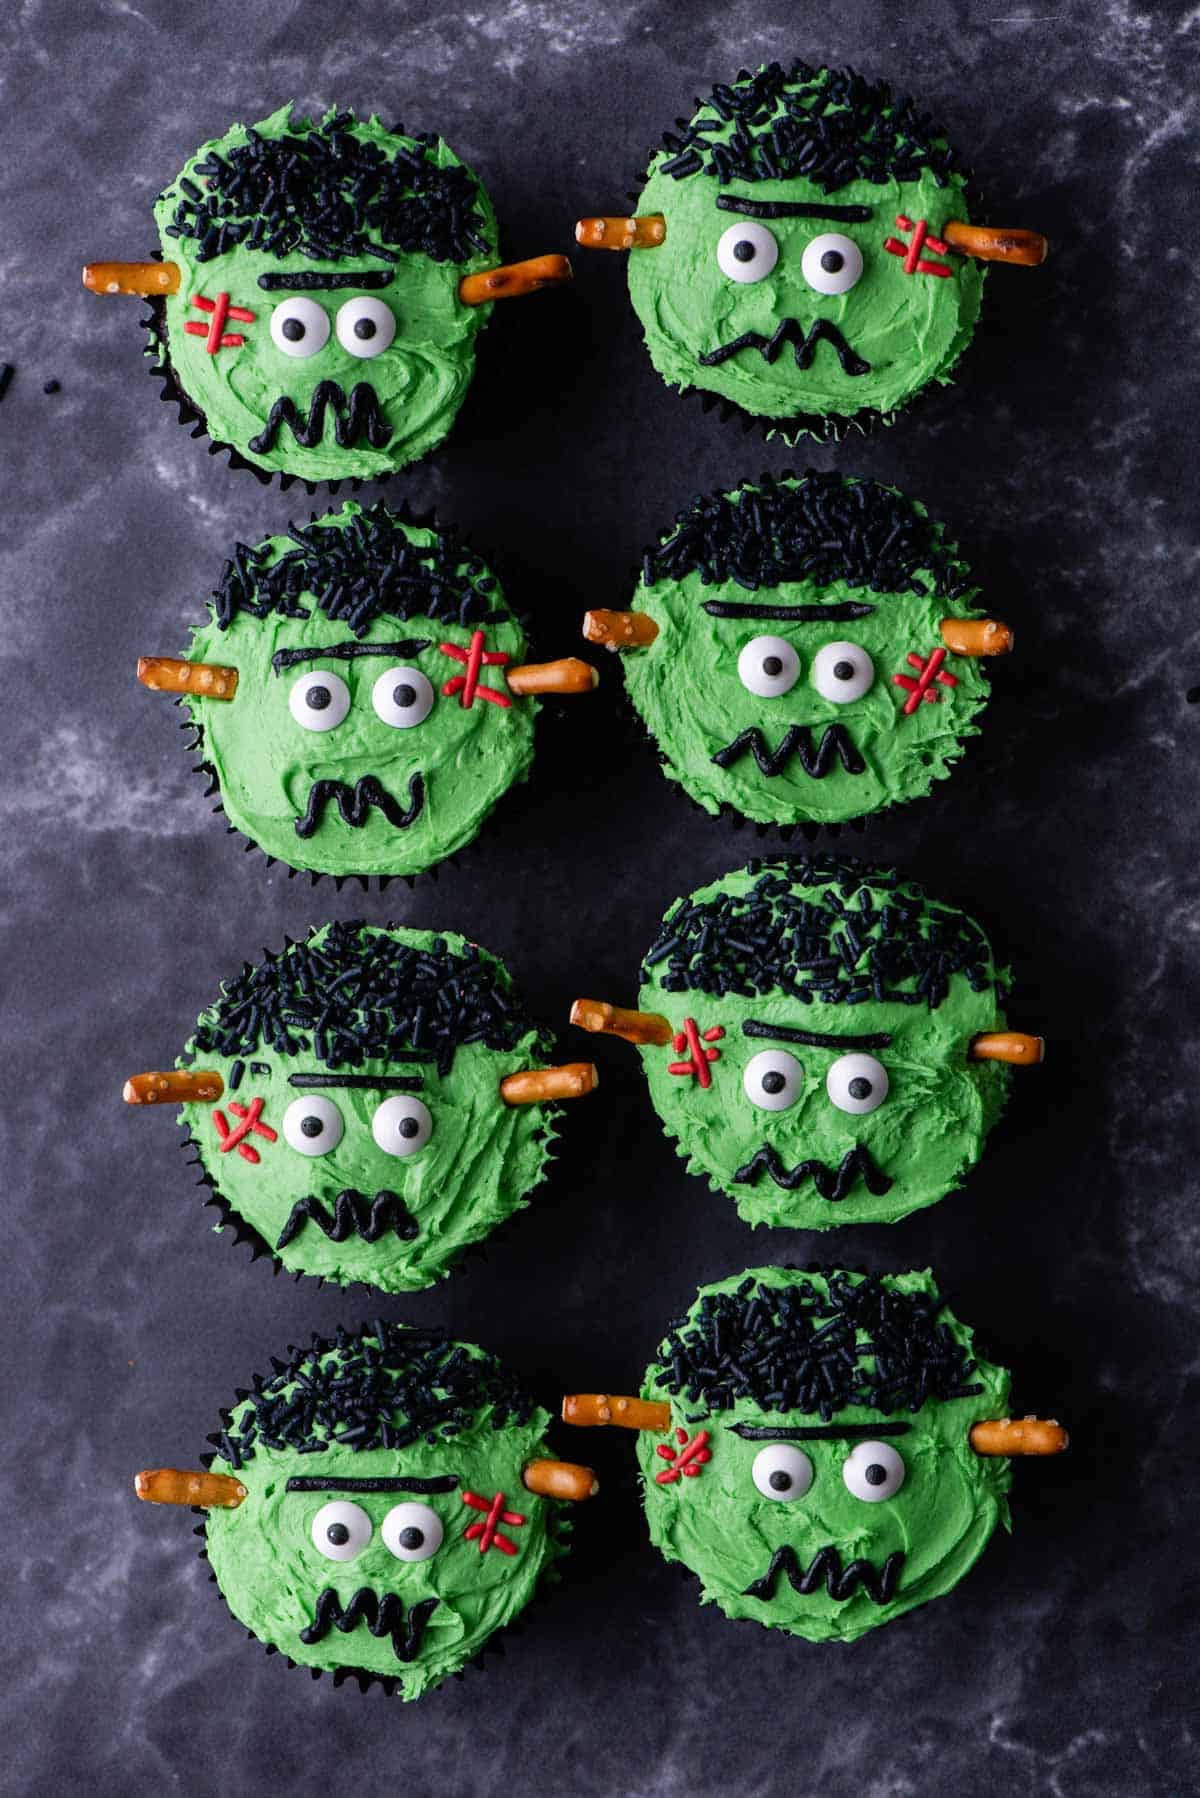 frankenstein cupcakes arranged in two rows on a grey surface